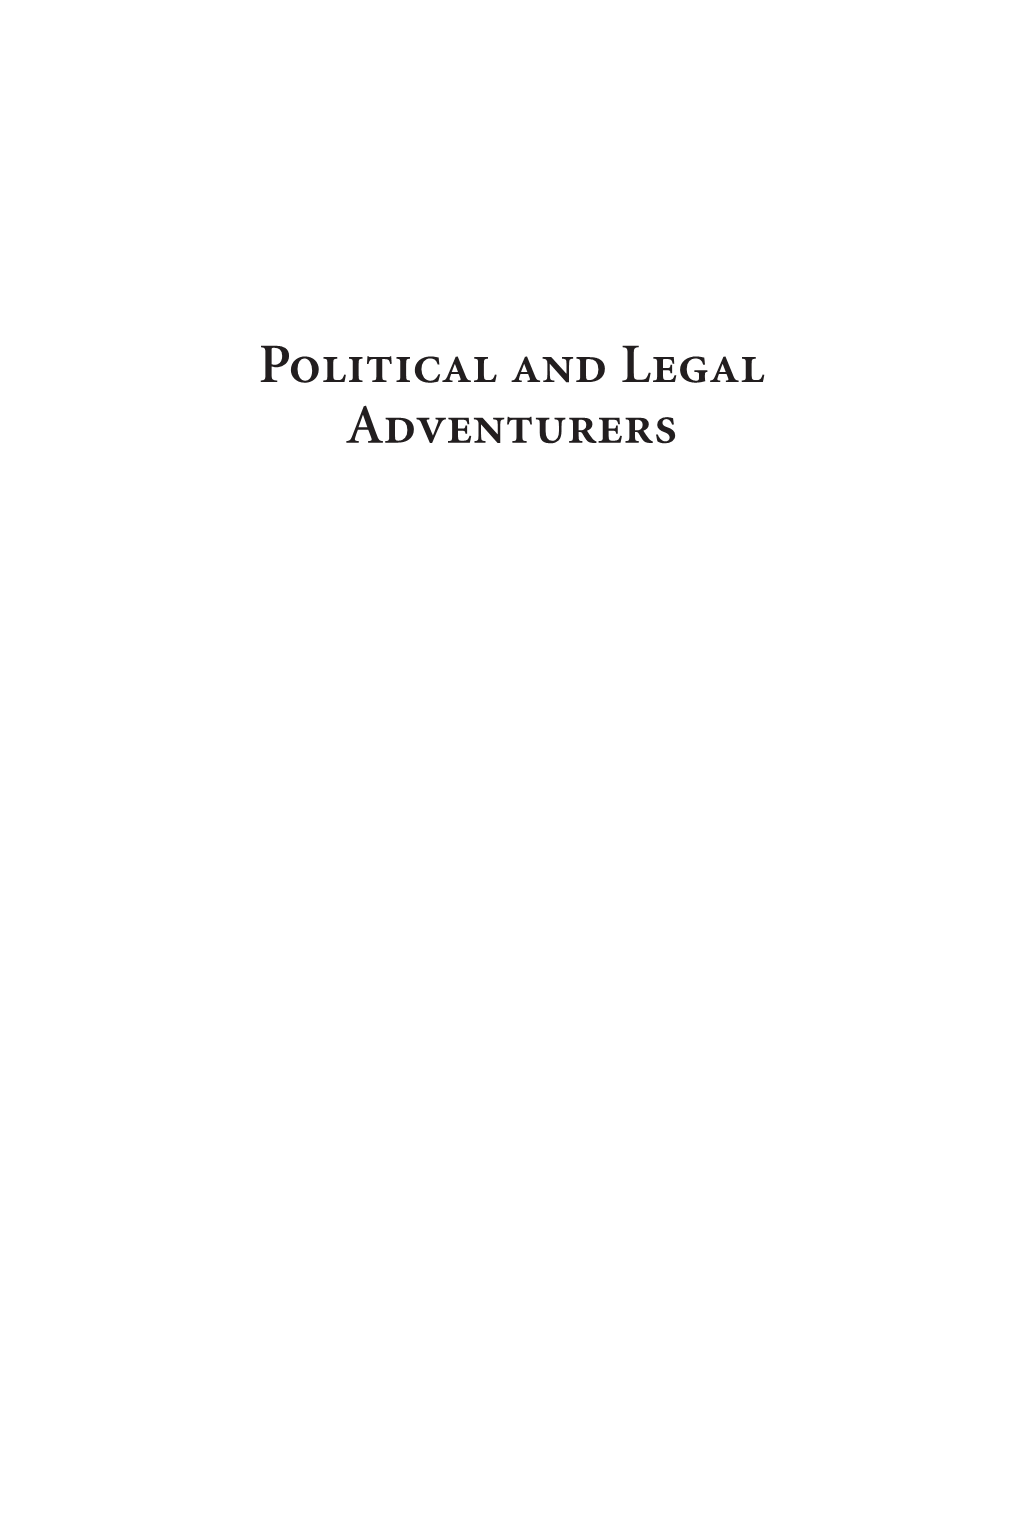 Political and Legal Adventurers 00 Oconnell Fmt X 8/12/09 8:40 AM Page Ii 00 Oconnell Fmt X 8/12/09 8:40 AM Page Iii